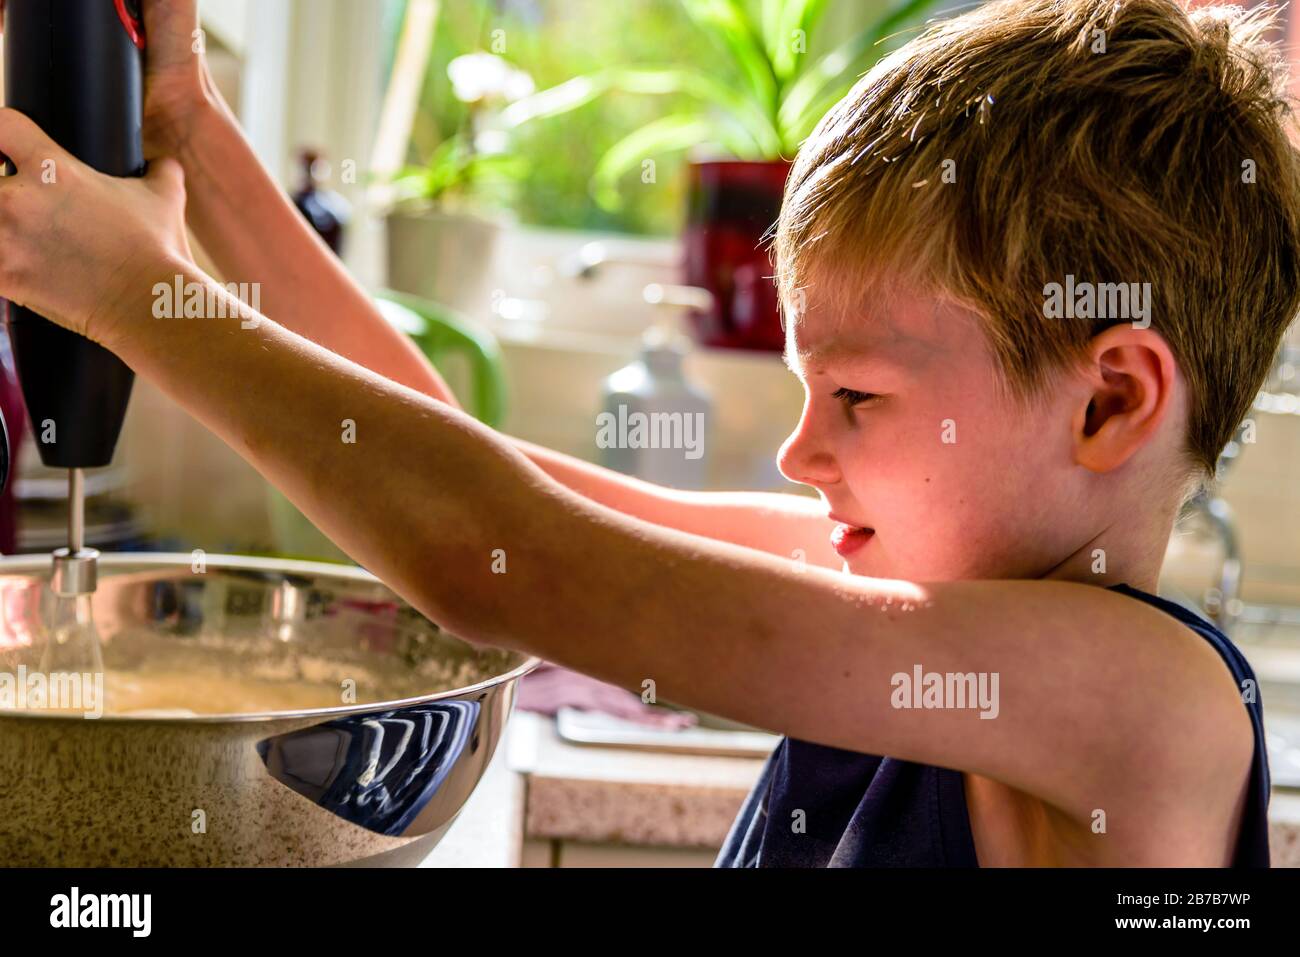 Cute Toddler Boy Using Hand Blender To Make Minced Meat. Preparing Meal in  the Kitchen Stock Image - Image of beauty, baby: 143580729